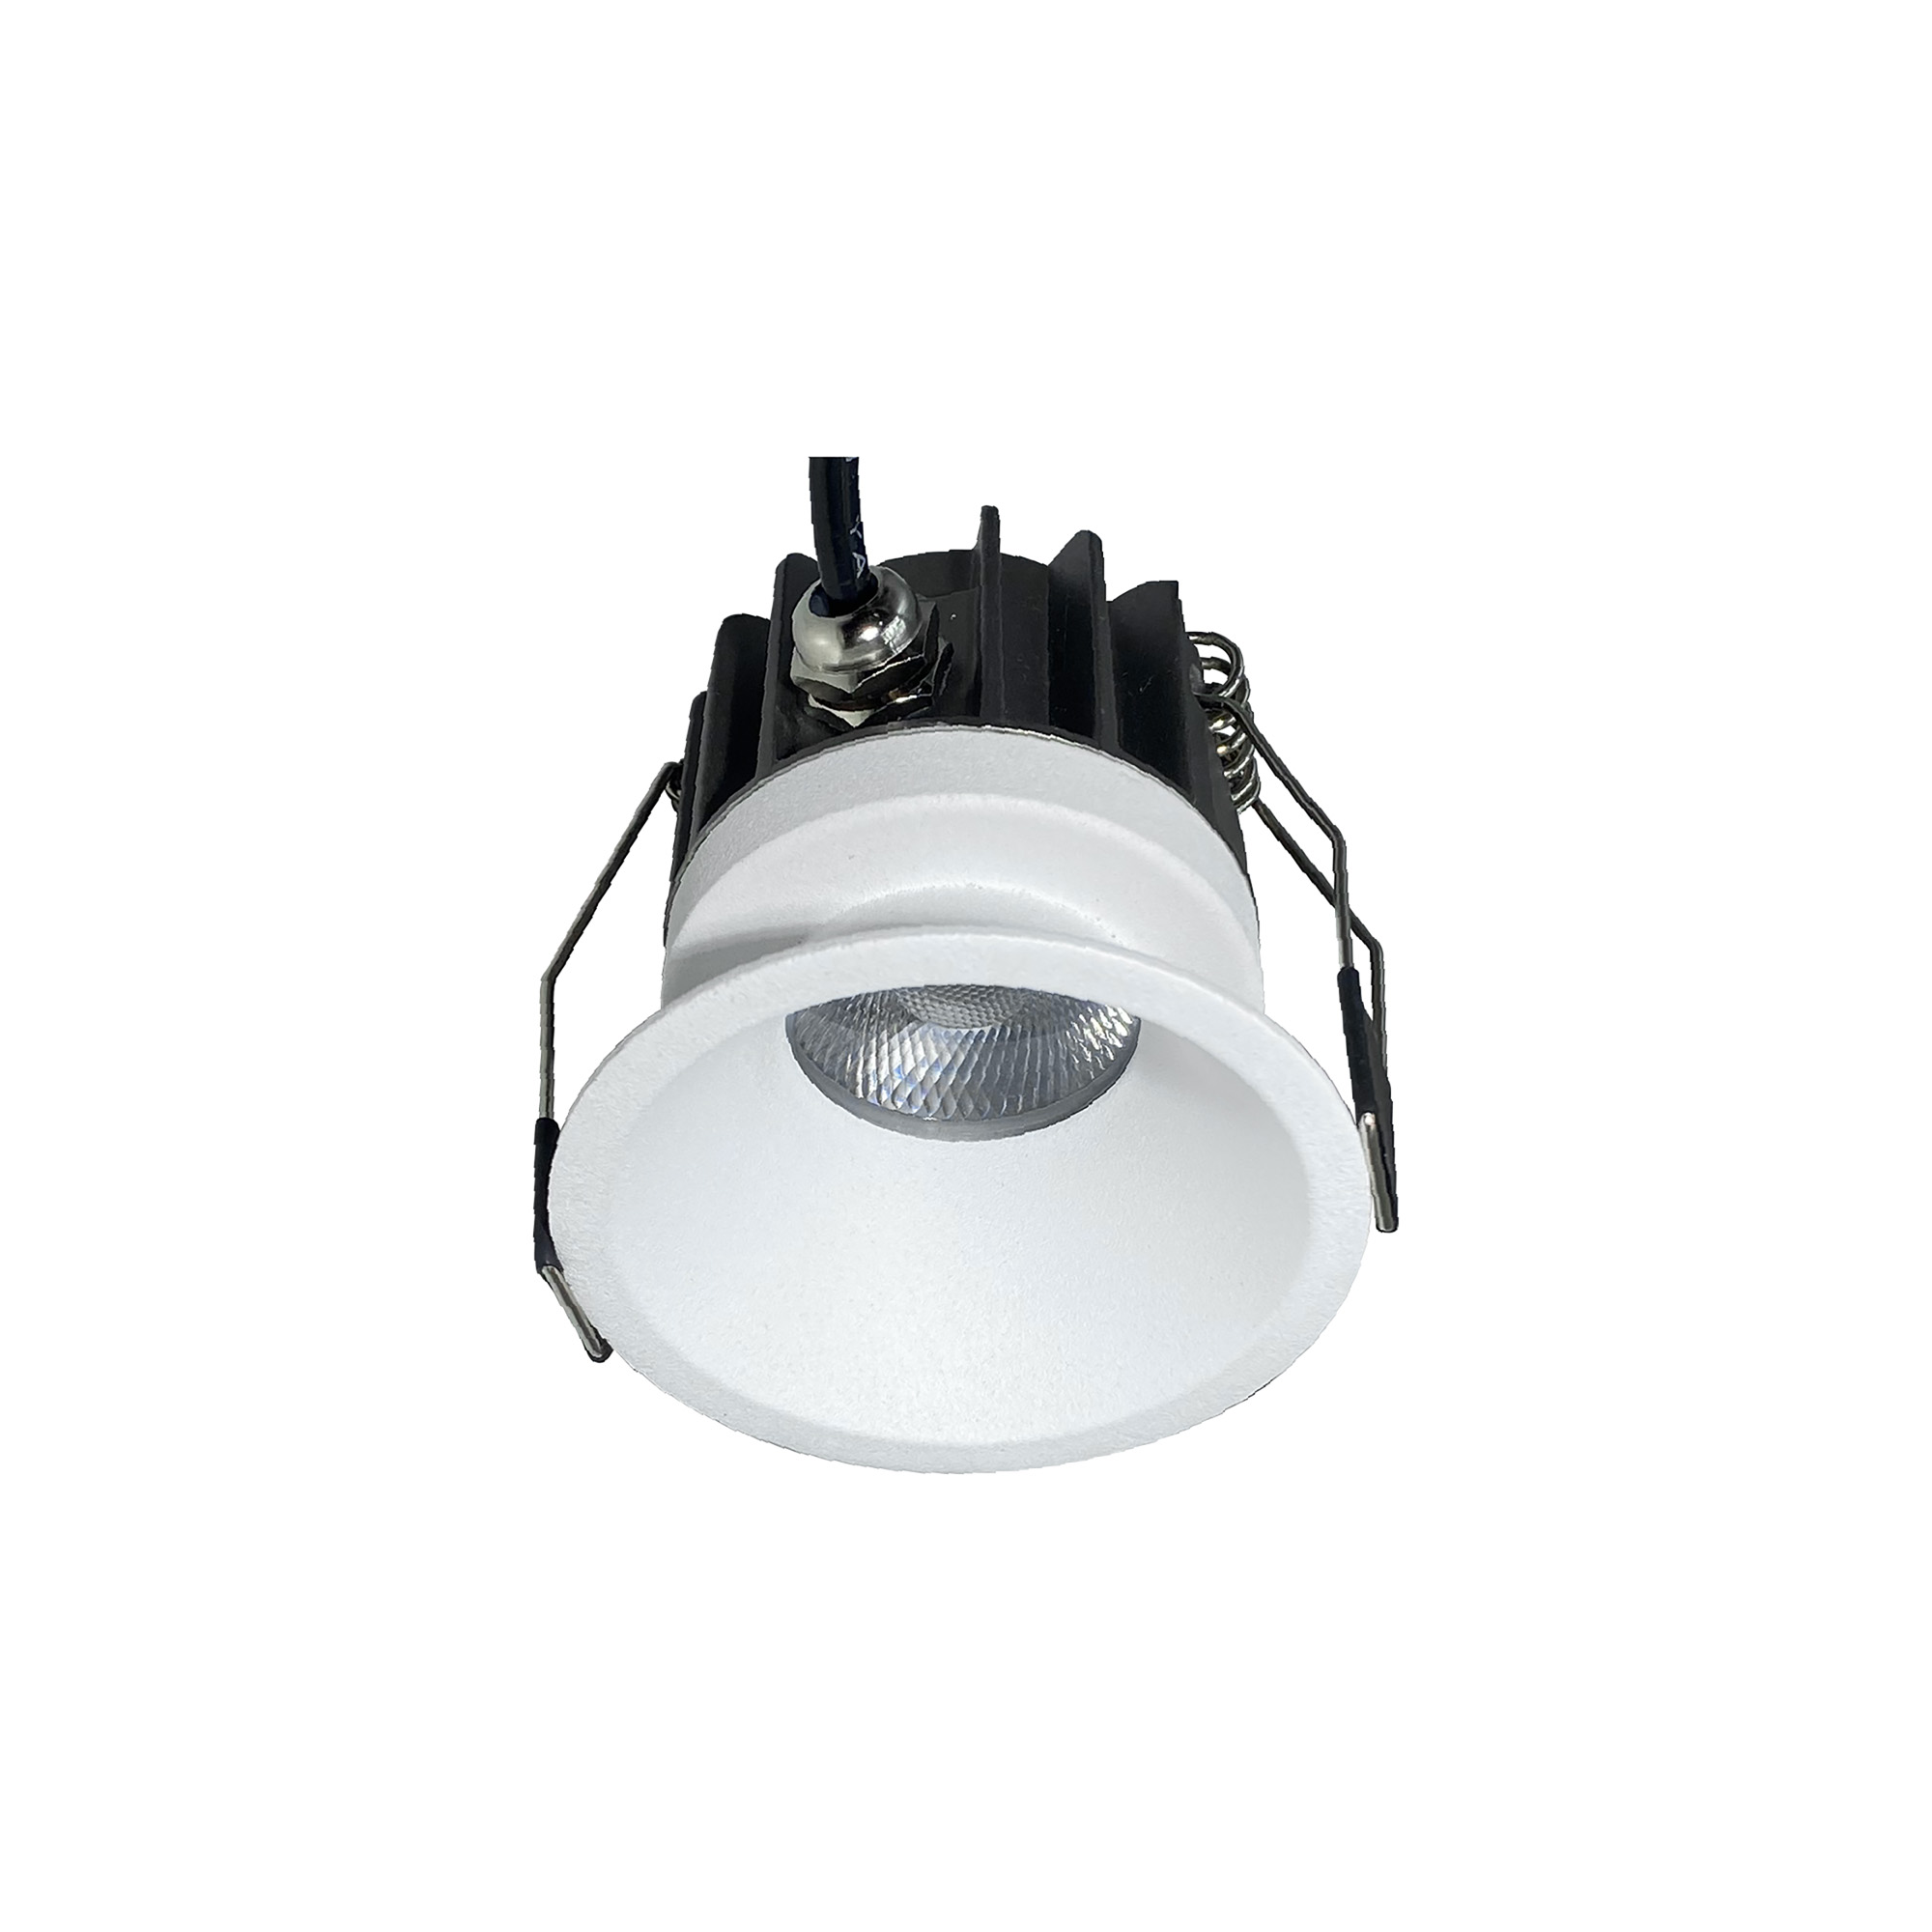 M8764  Rombok Downlight 8W LED; Dimmable CCT LED; Cut Out: 55mm; 720lm; 36° Deg; IP65 DRIVER INC.; White